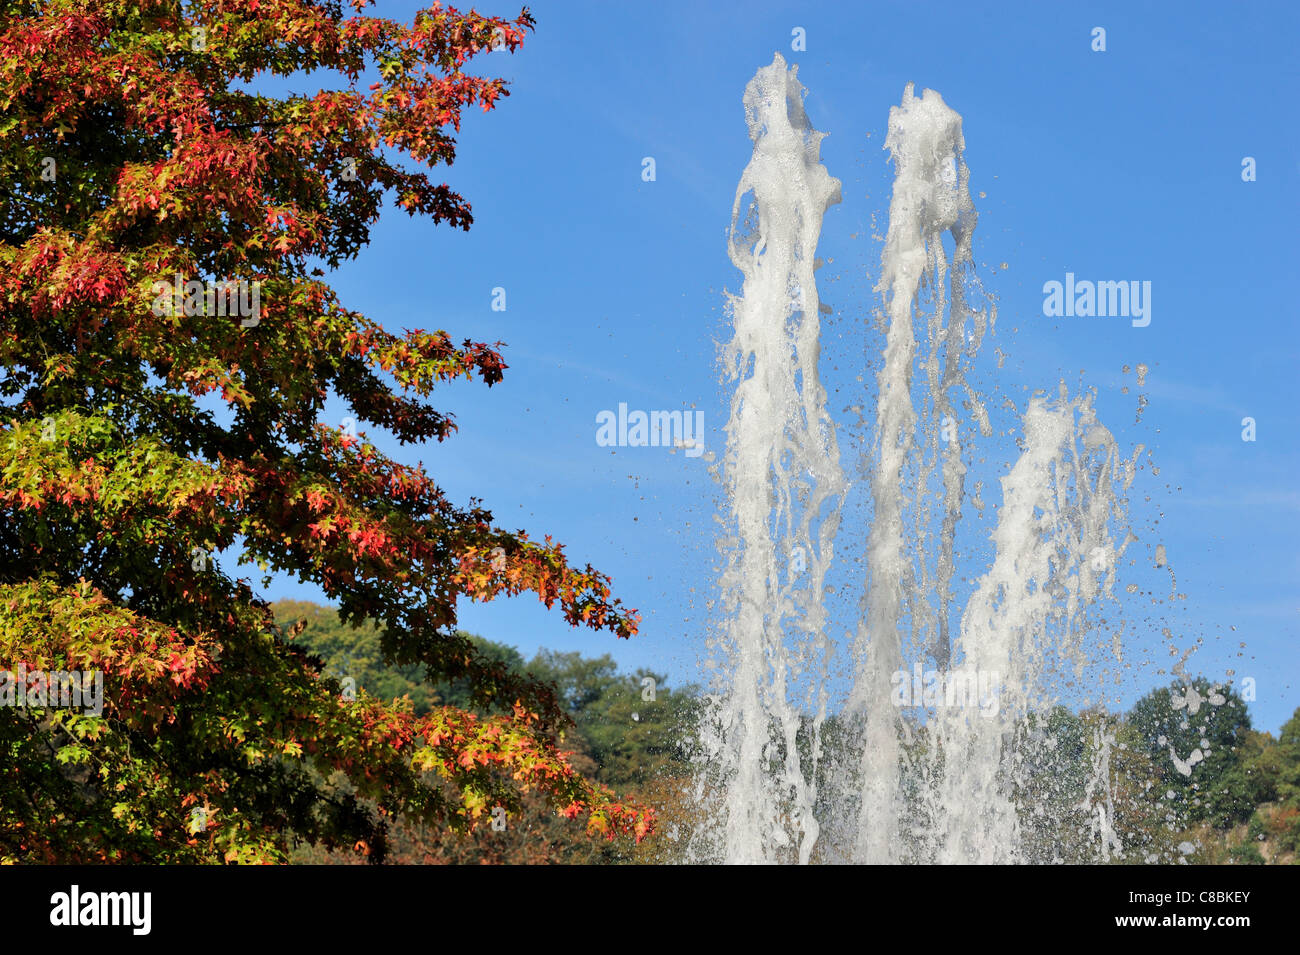 Fountain and Scarlet oak (Quercus coccinea), native to North America in autumn colours in park Stock Photo